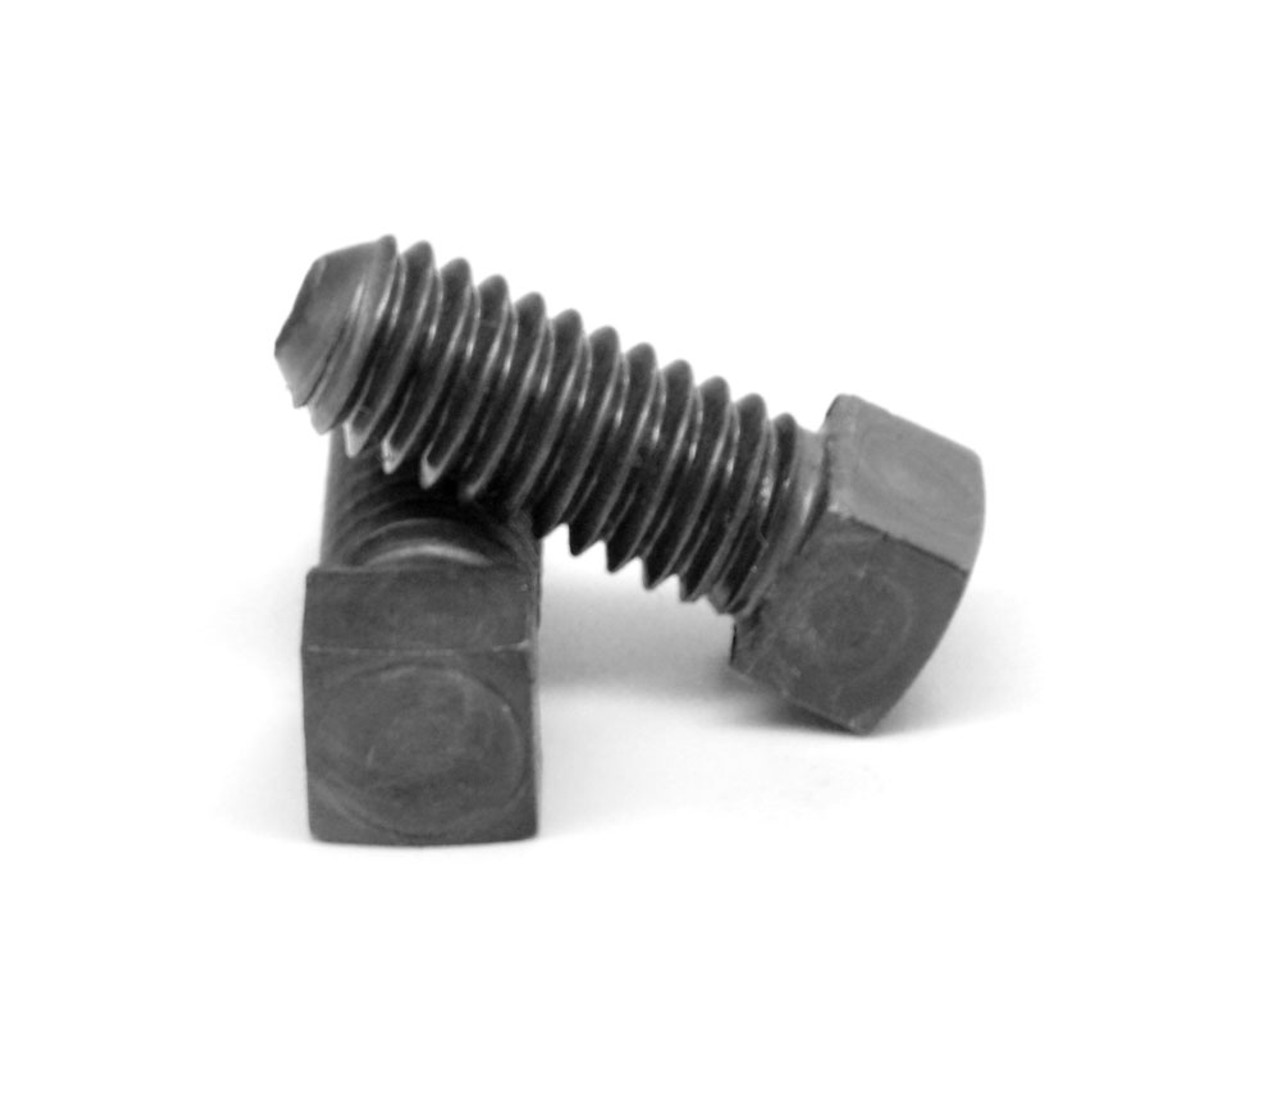 9/16"-12 x 1 1/2" (FT) Coarse Thread Square Head Set Screw Cup Point Low Carbon Steel Case Hardened Plain Finish